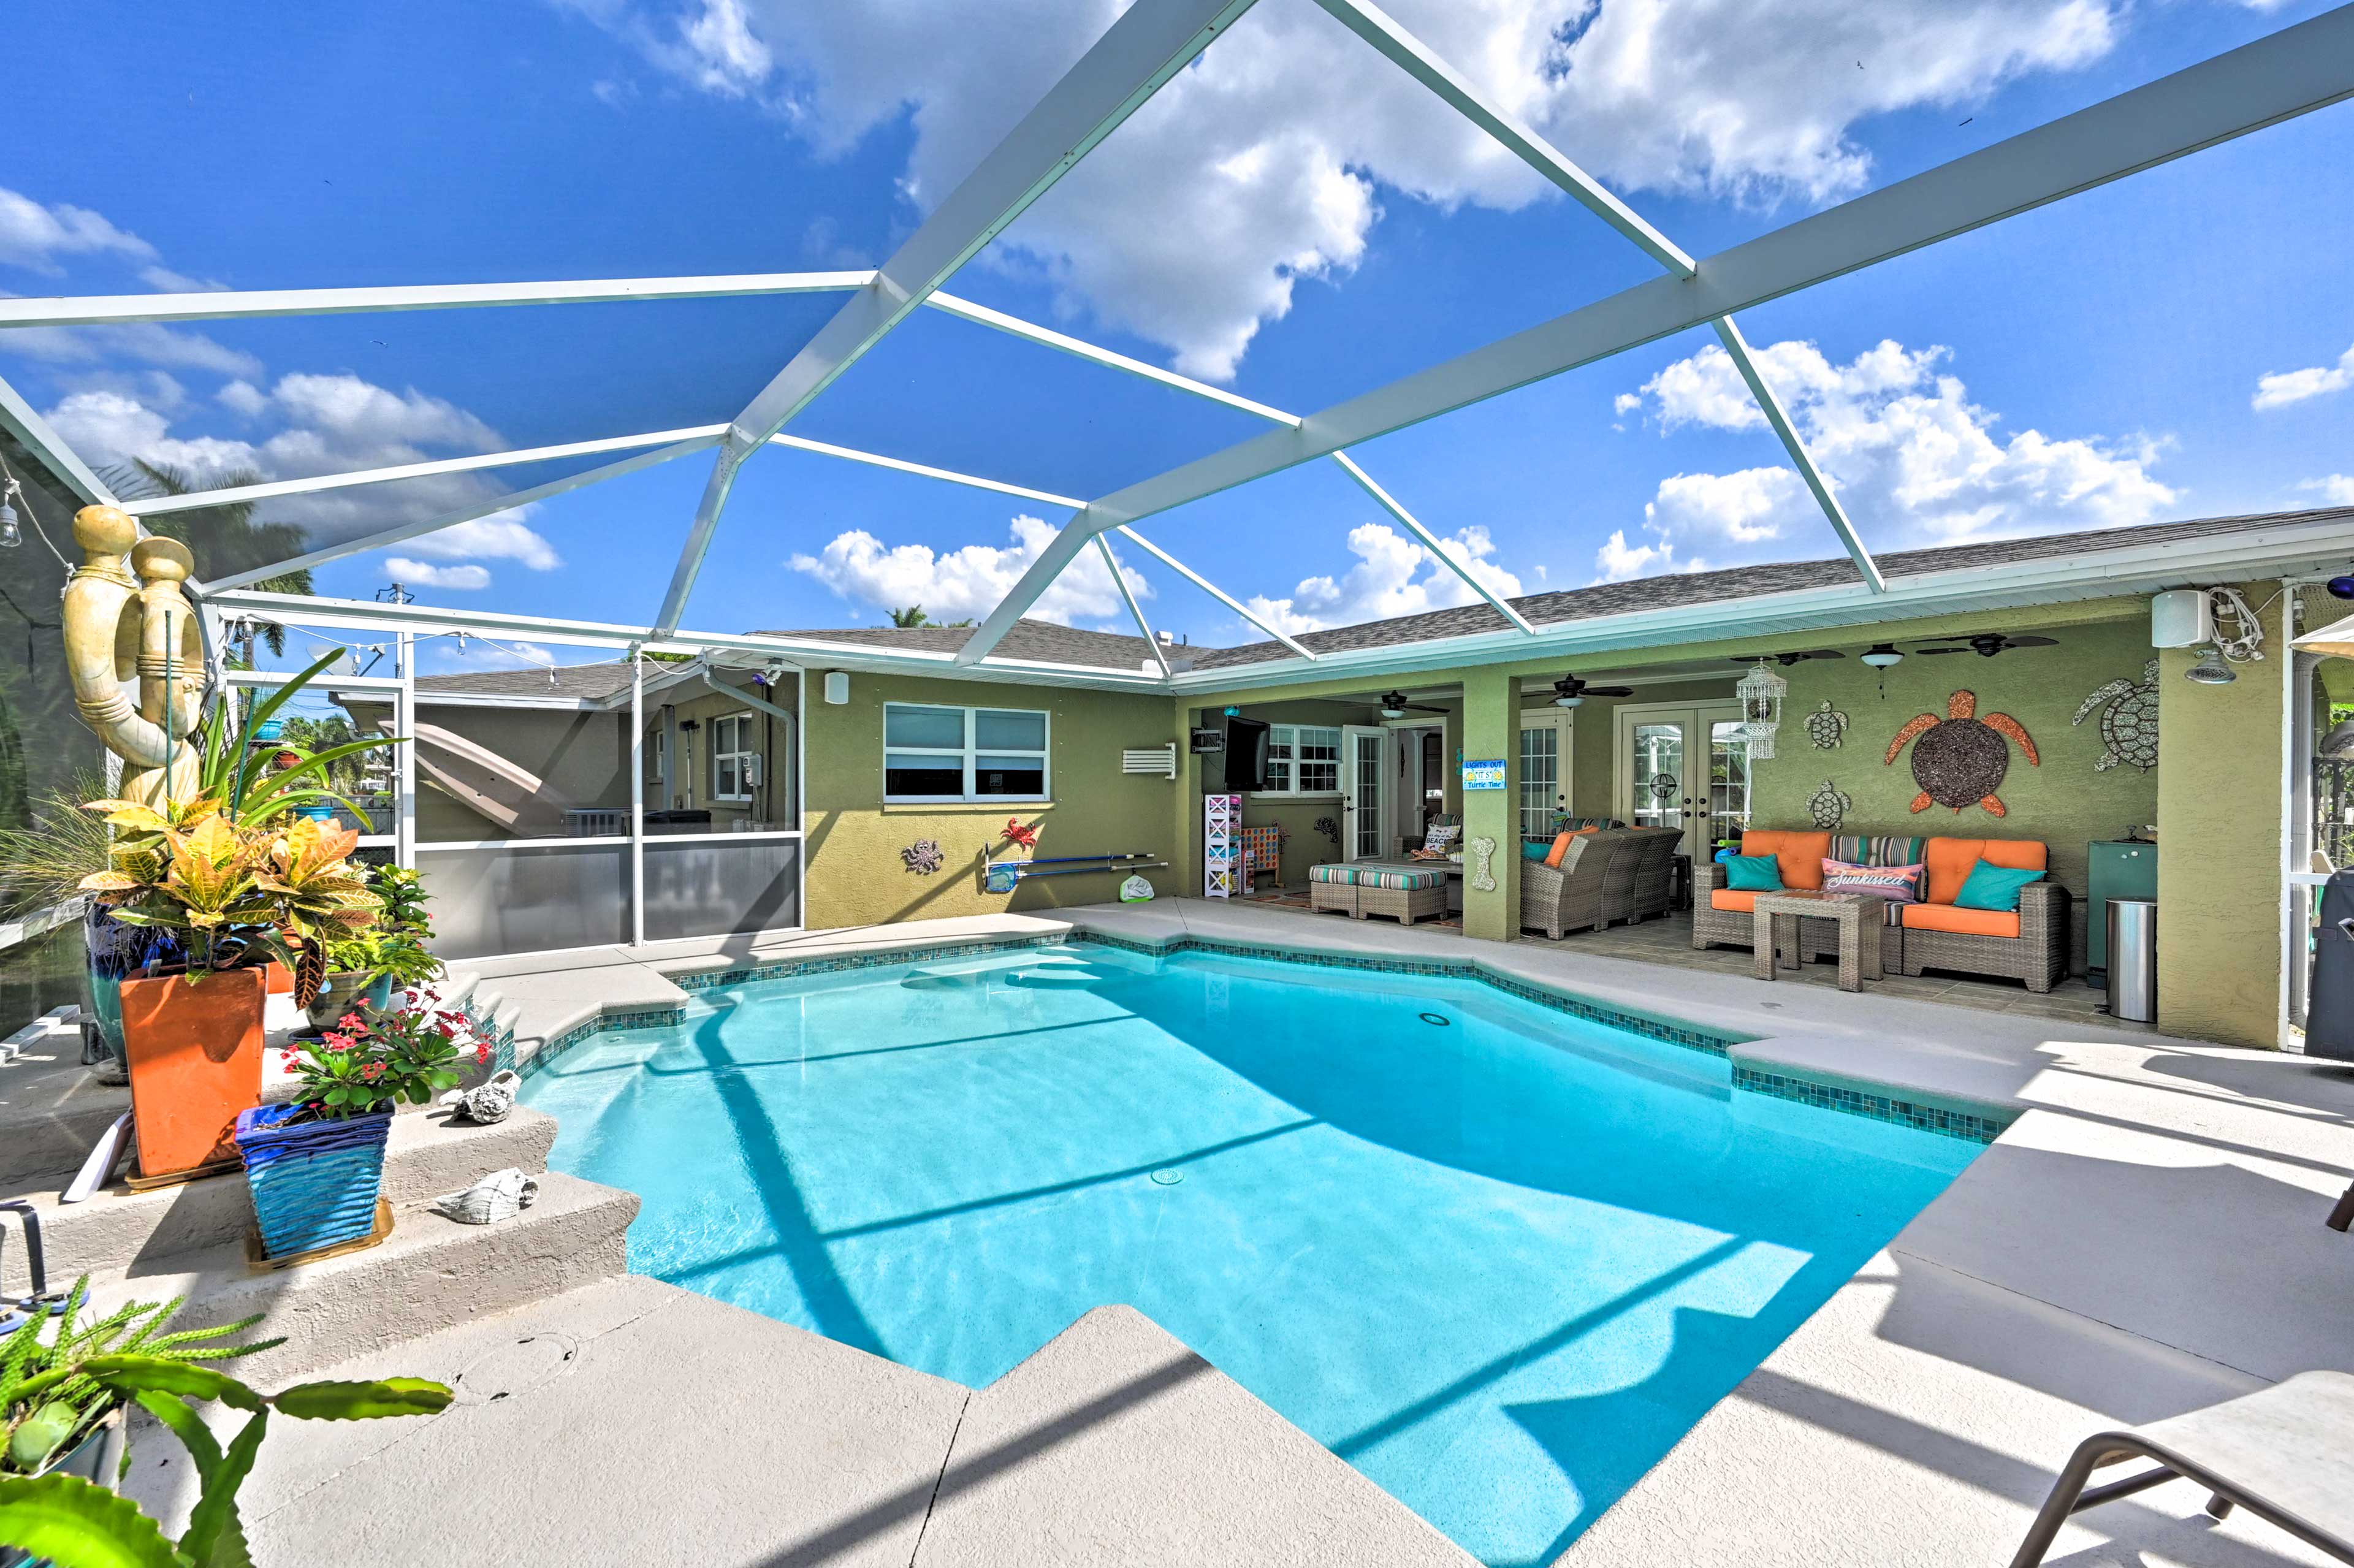 Cape Coral Vacation Rental | 4BR | 3.5BA | Step-Free Access | 2,500 Sq Ft